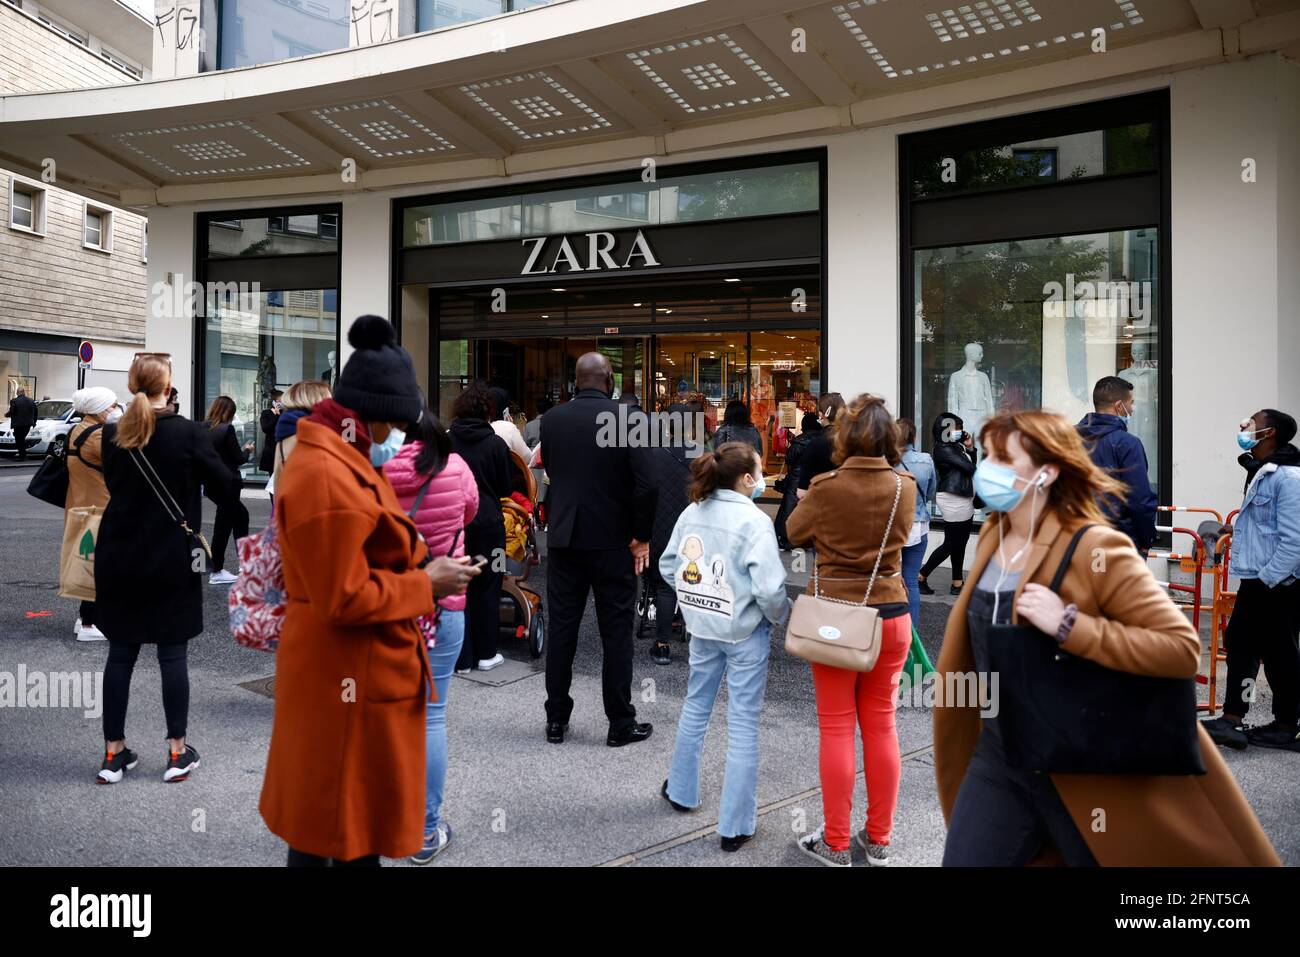 Customers stand in front of a Zara shop in Nantes as non-essential business  re-open after closing down for months, amid the coronavirus disease  (COVID-19) outbreak in France, May 19, 2021. REUTERS/Stephane Mahe